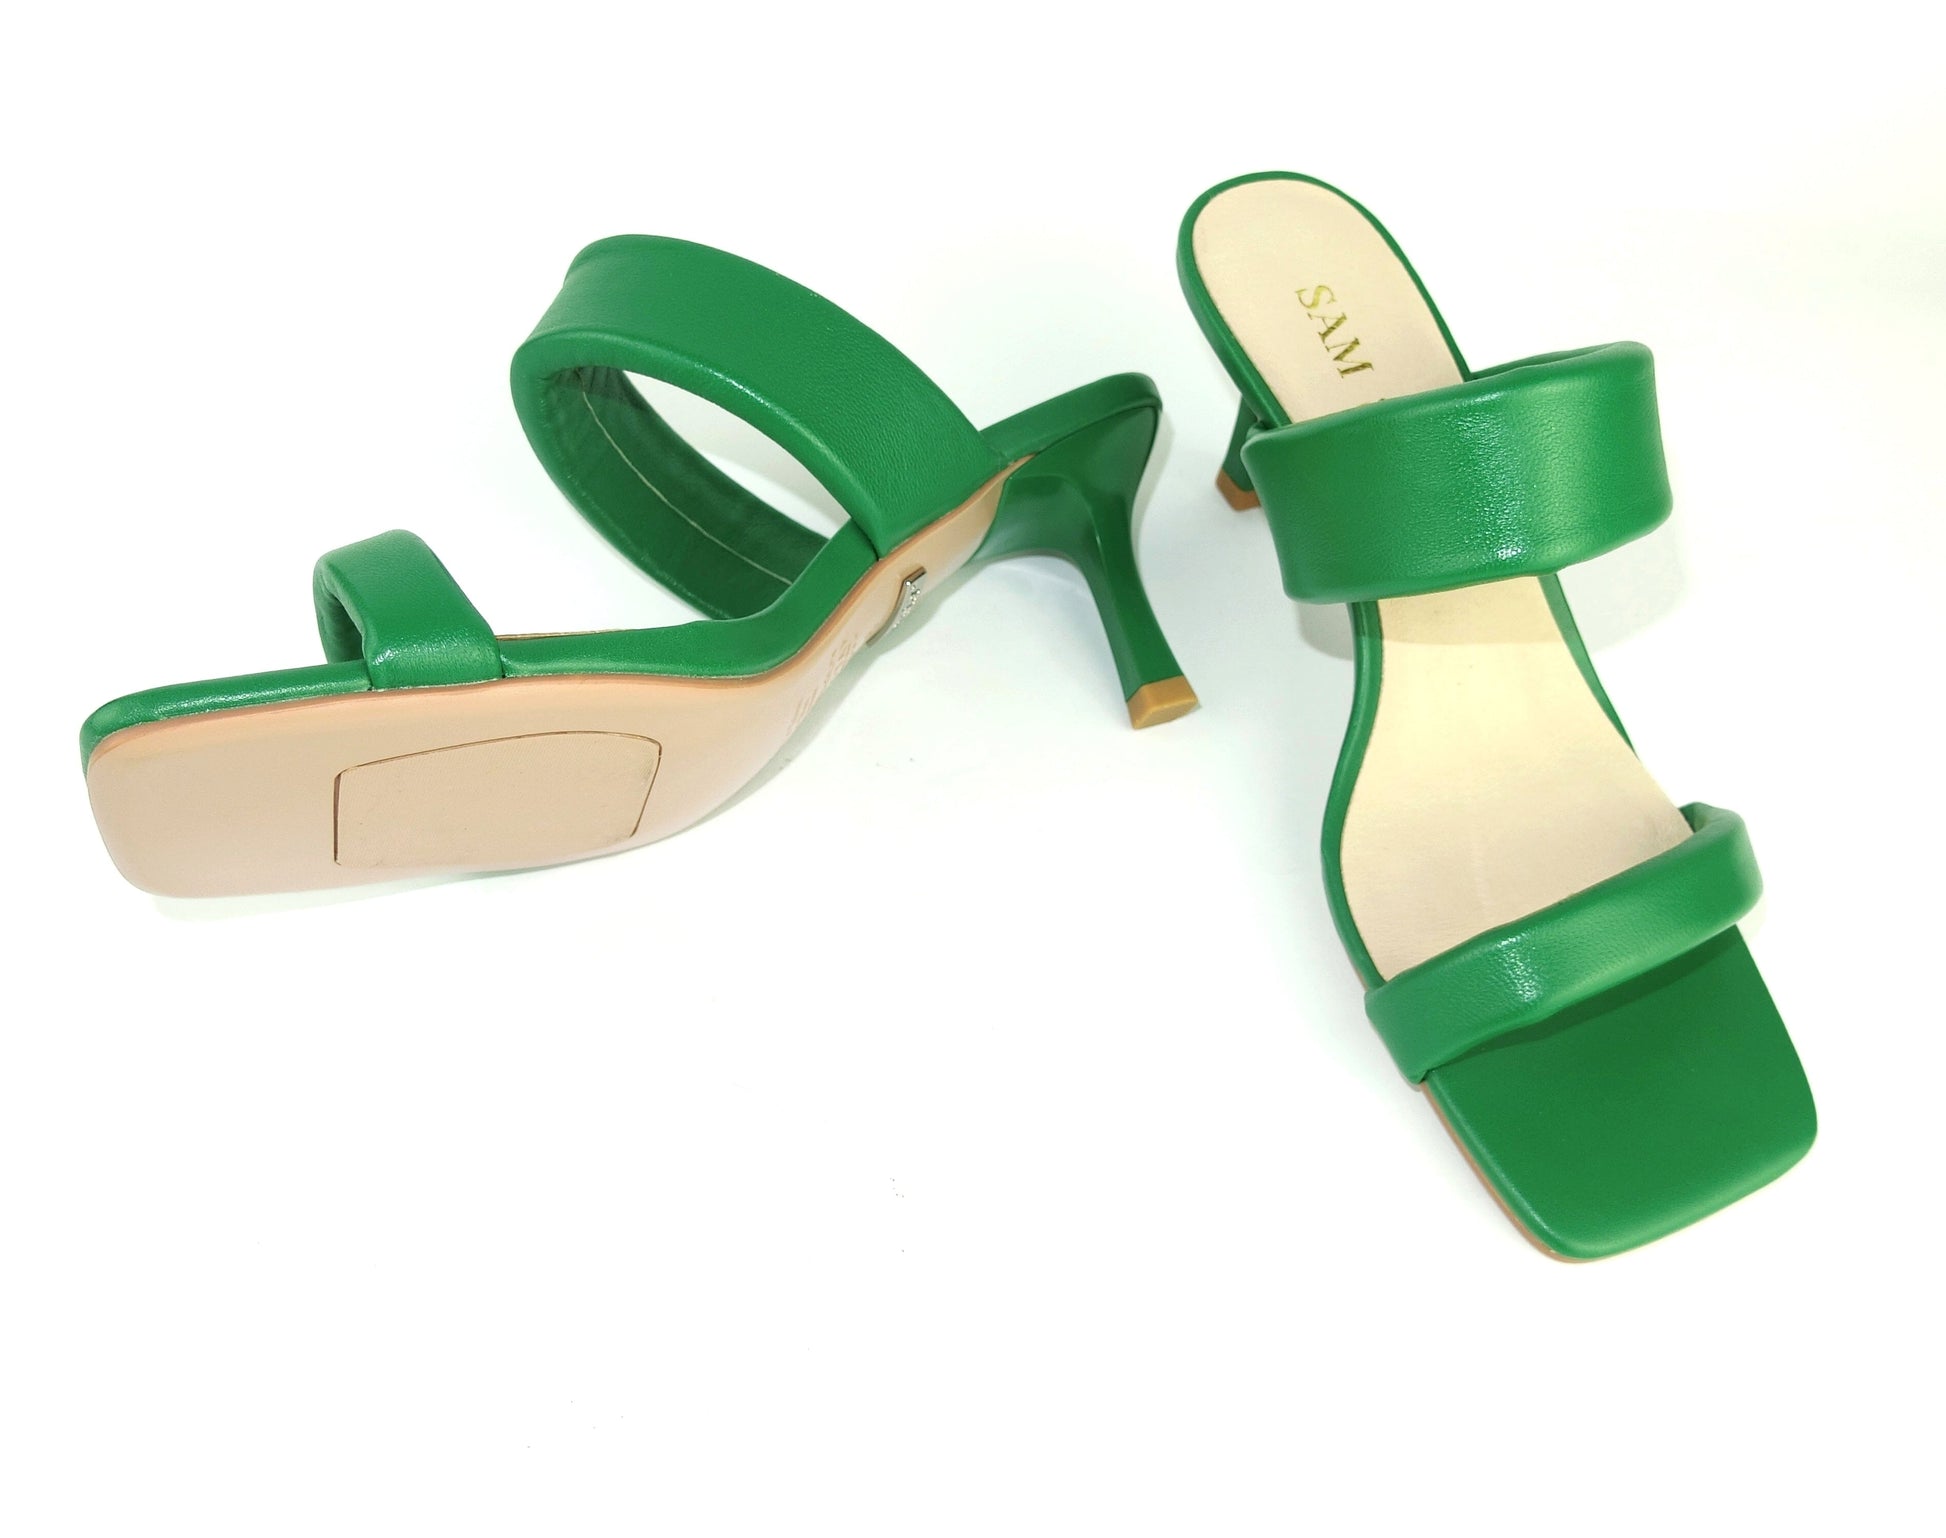 SS22012 Genuine leather puffy straps sandals in Green sandals Sam Star Shoes 